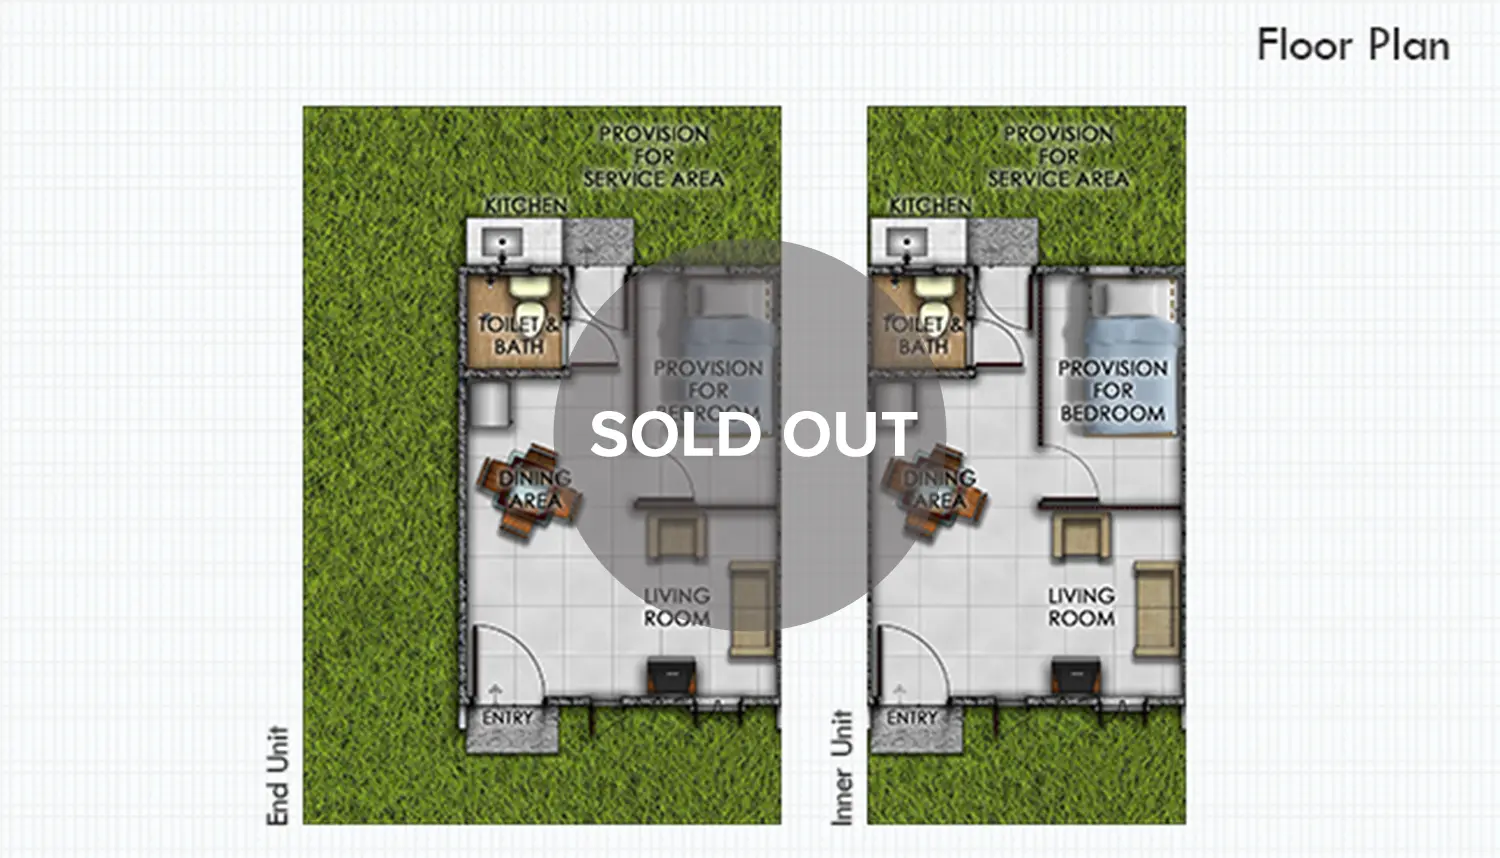 /assets/properties-house-model-gallery-and-landmarks-icons/lumina-home-models/home-model-gallery/aimee-rowhouse/lumina-aimee-rowhouse-floor-plan-sold-out.webp